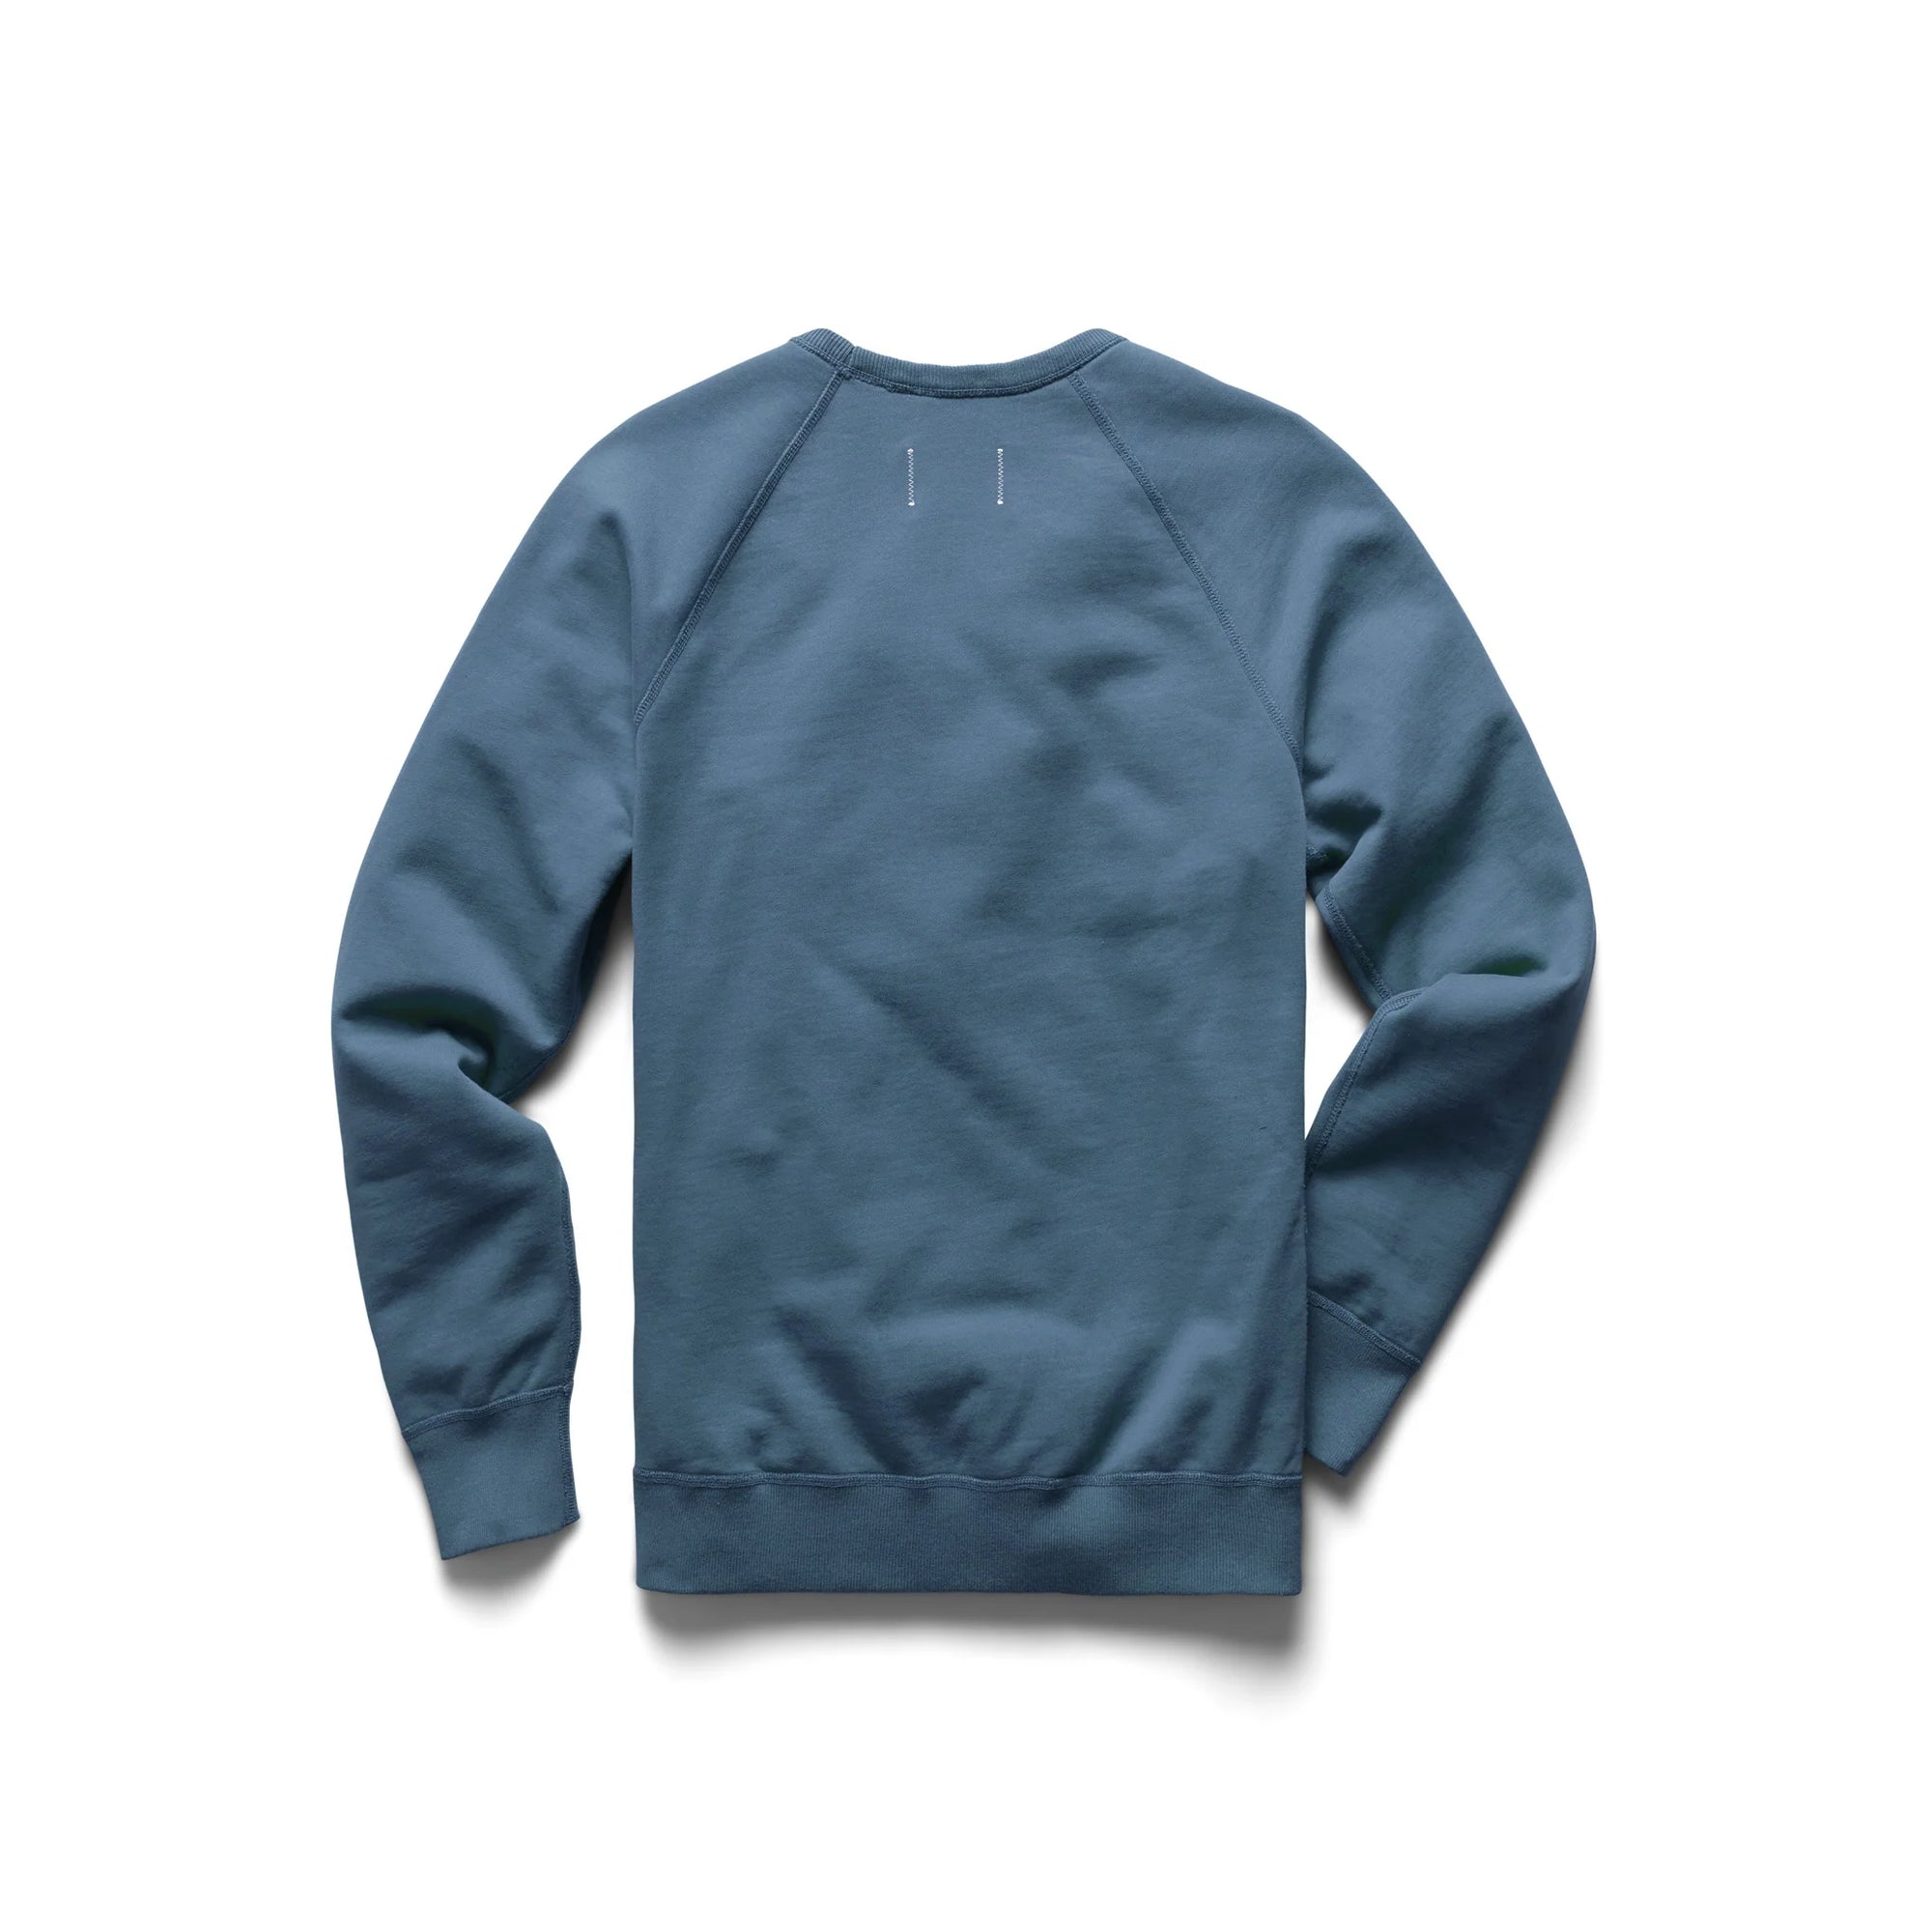 Reigning Champ Lightweight Terry Crewneck in Washed Blue